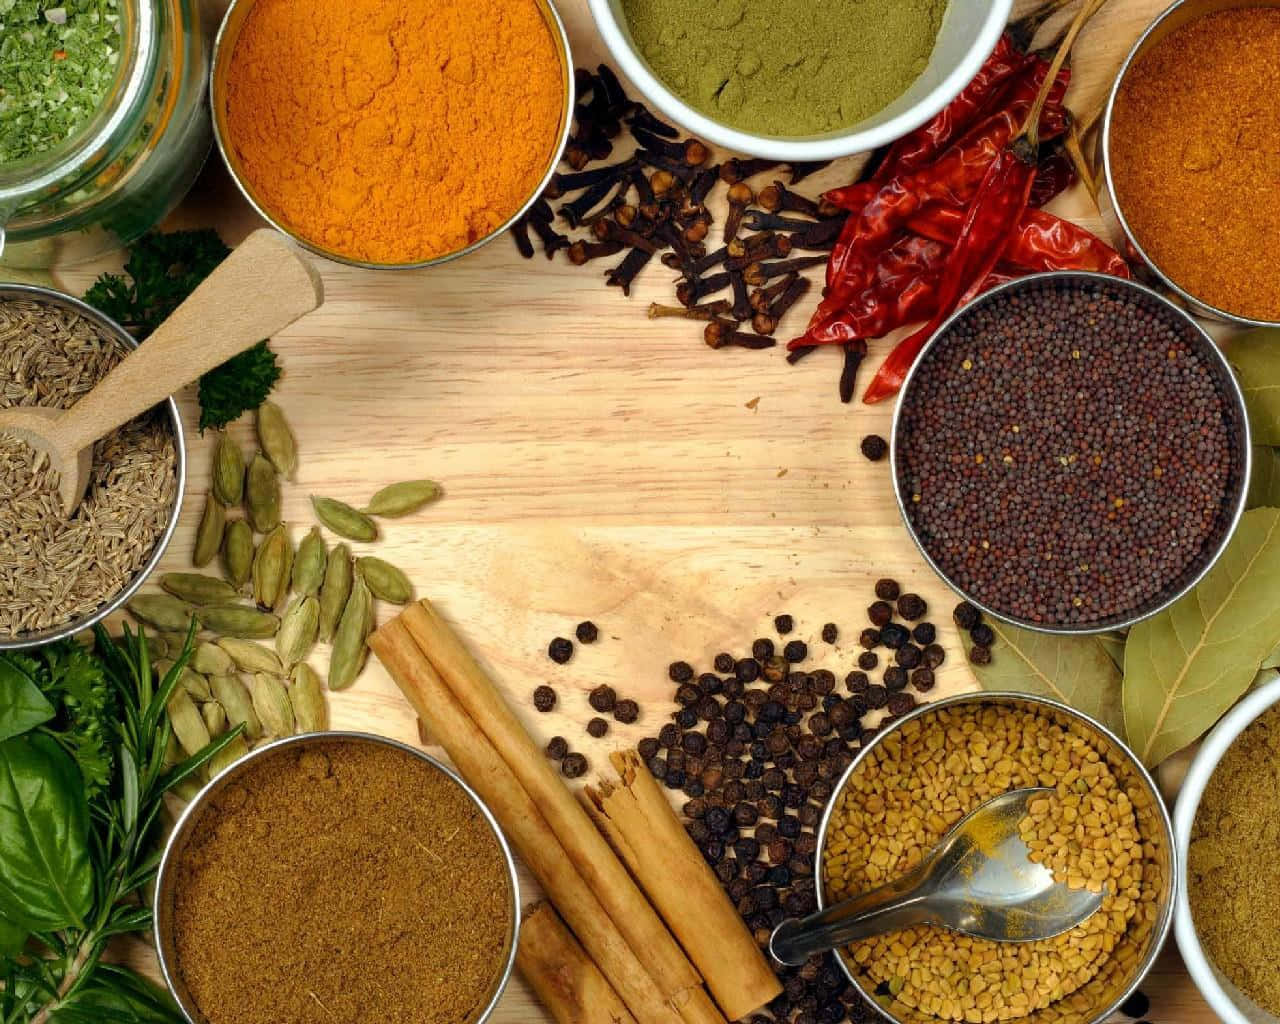 A Variety Of Spices And Herbs On A Wooden Table